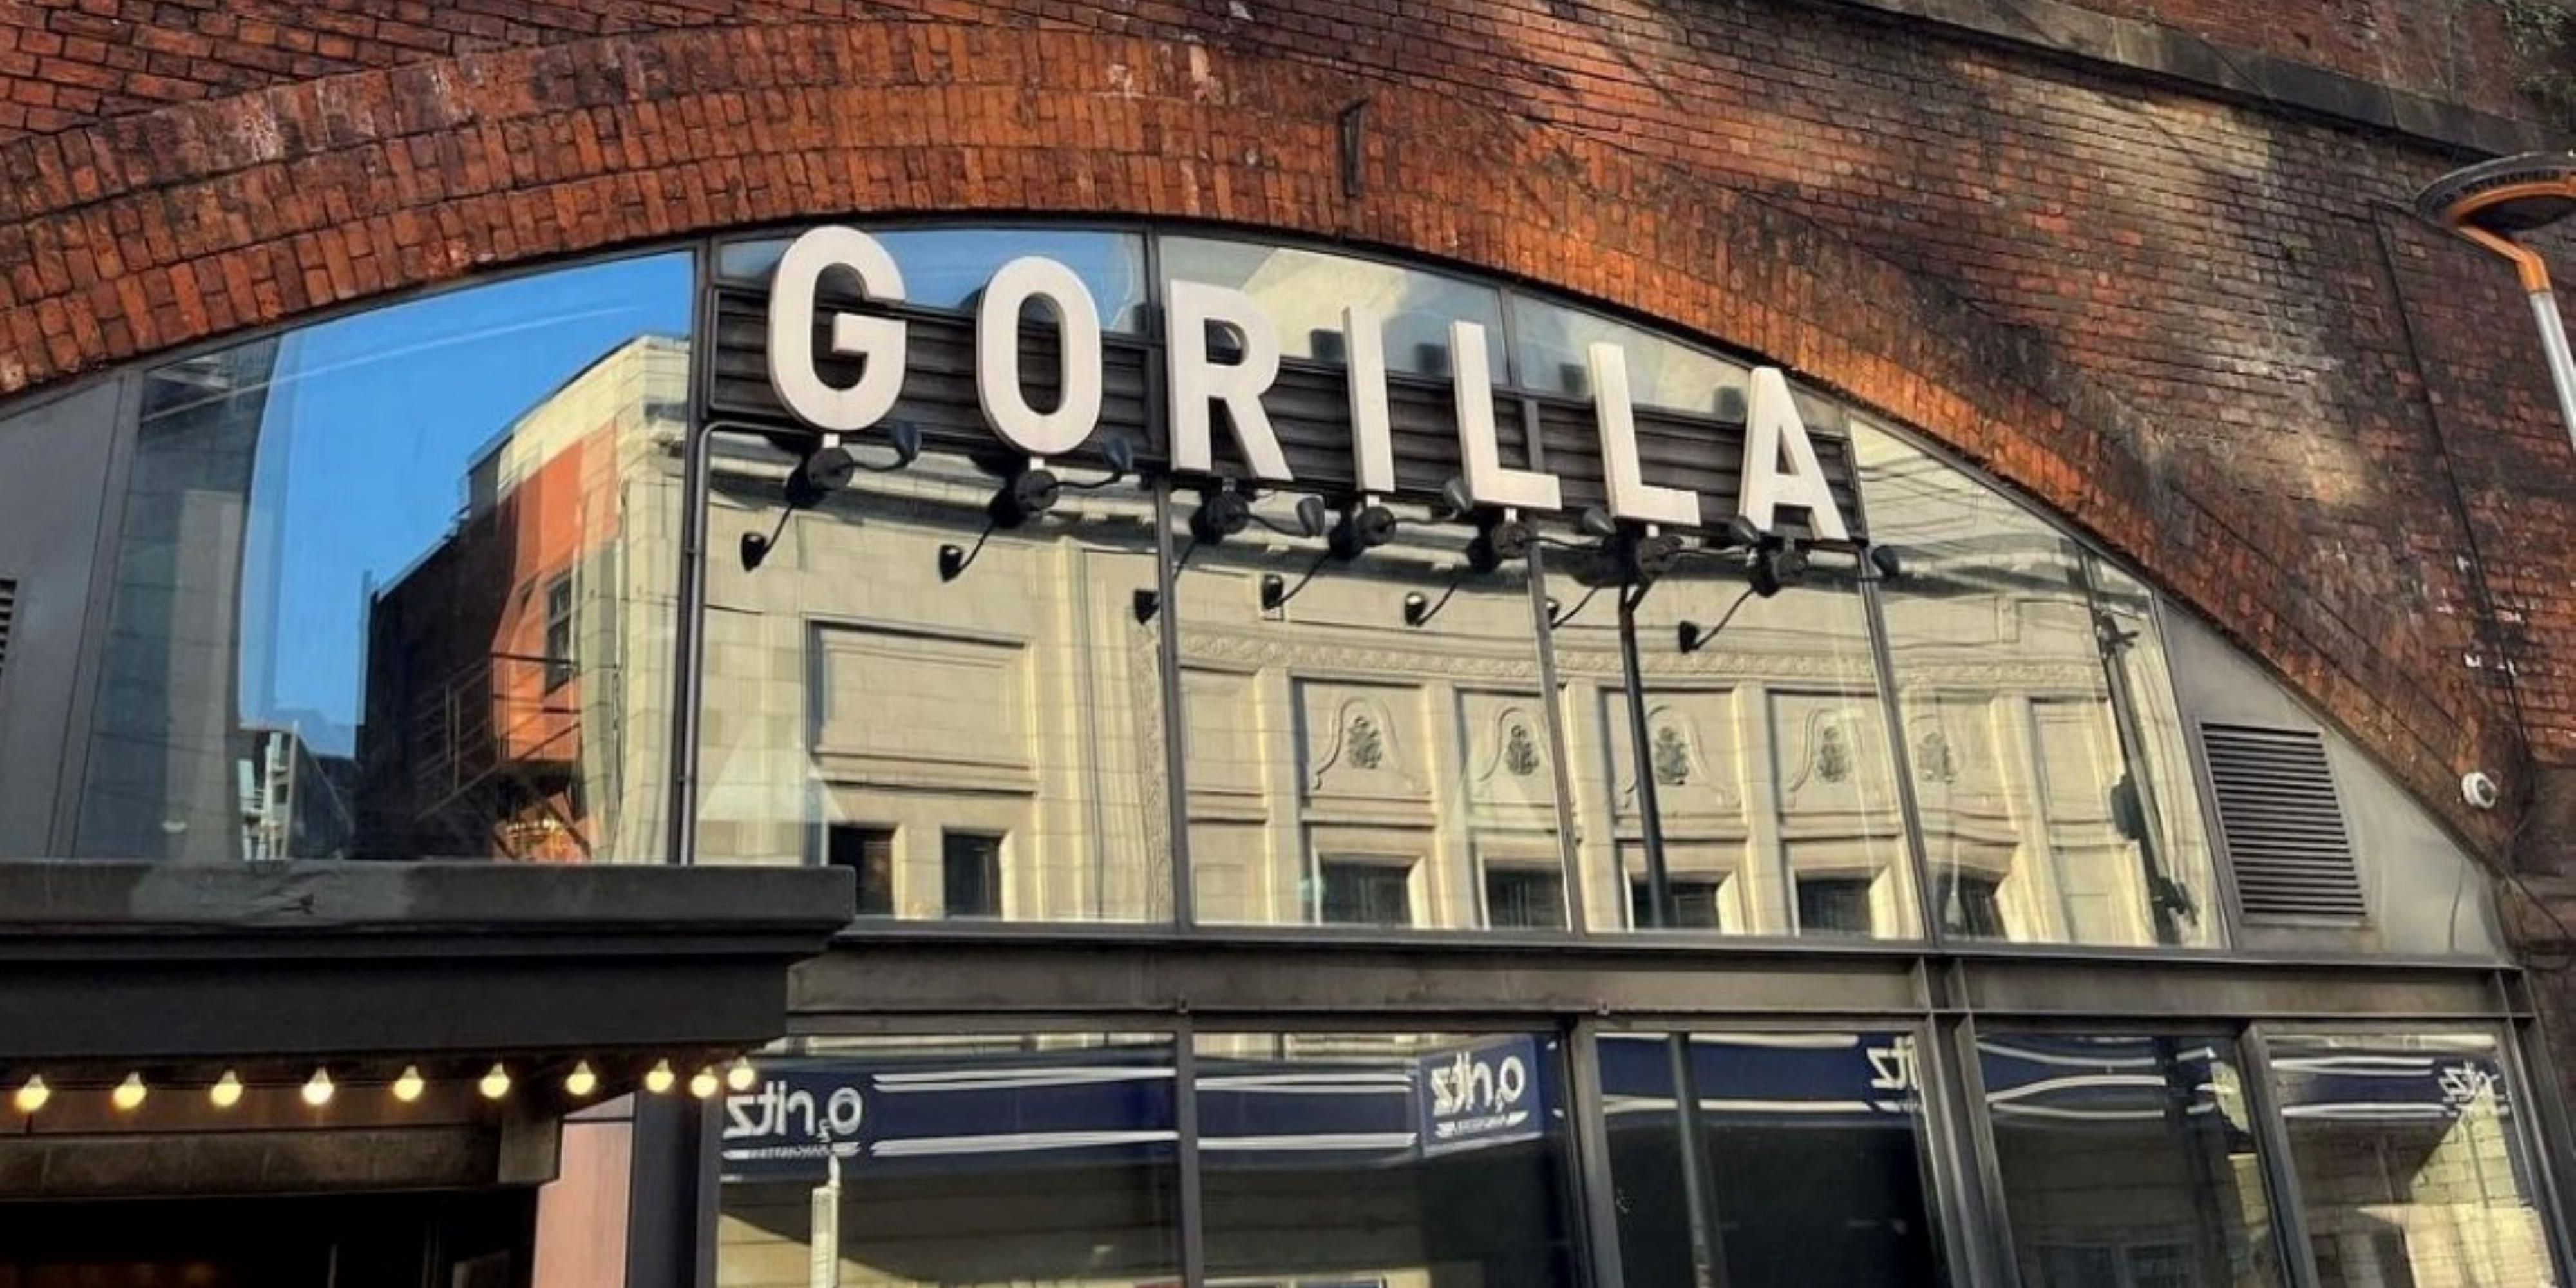 The hotel is ideally situated just 0.2 miles and a 3 minute walk from the popular Gorilla Stage and Club venue. WIth nightly entertainment a bar and restaurant.